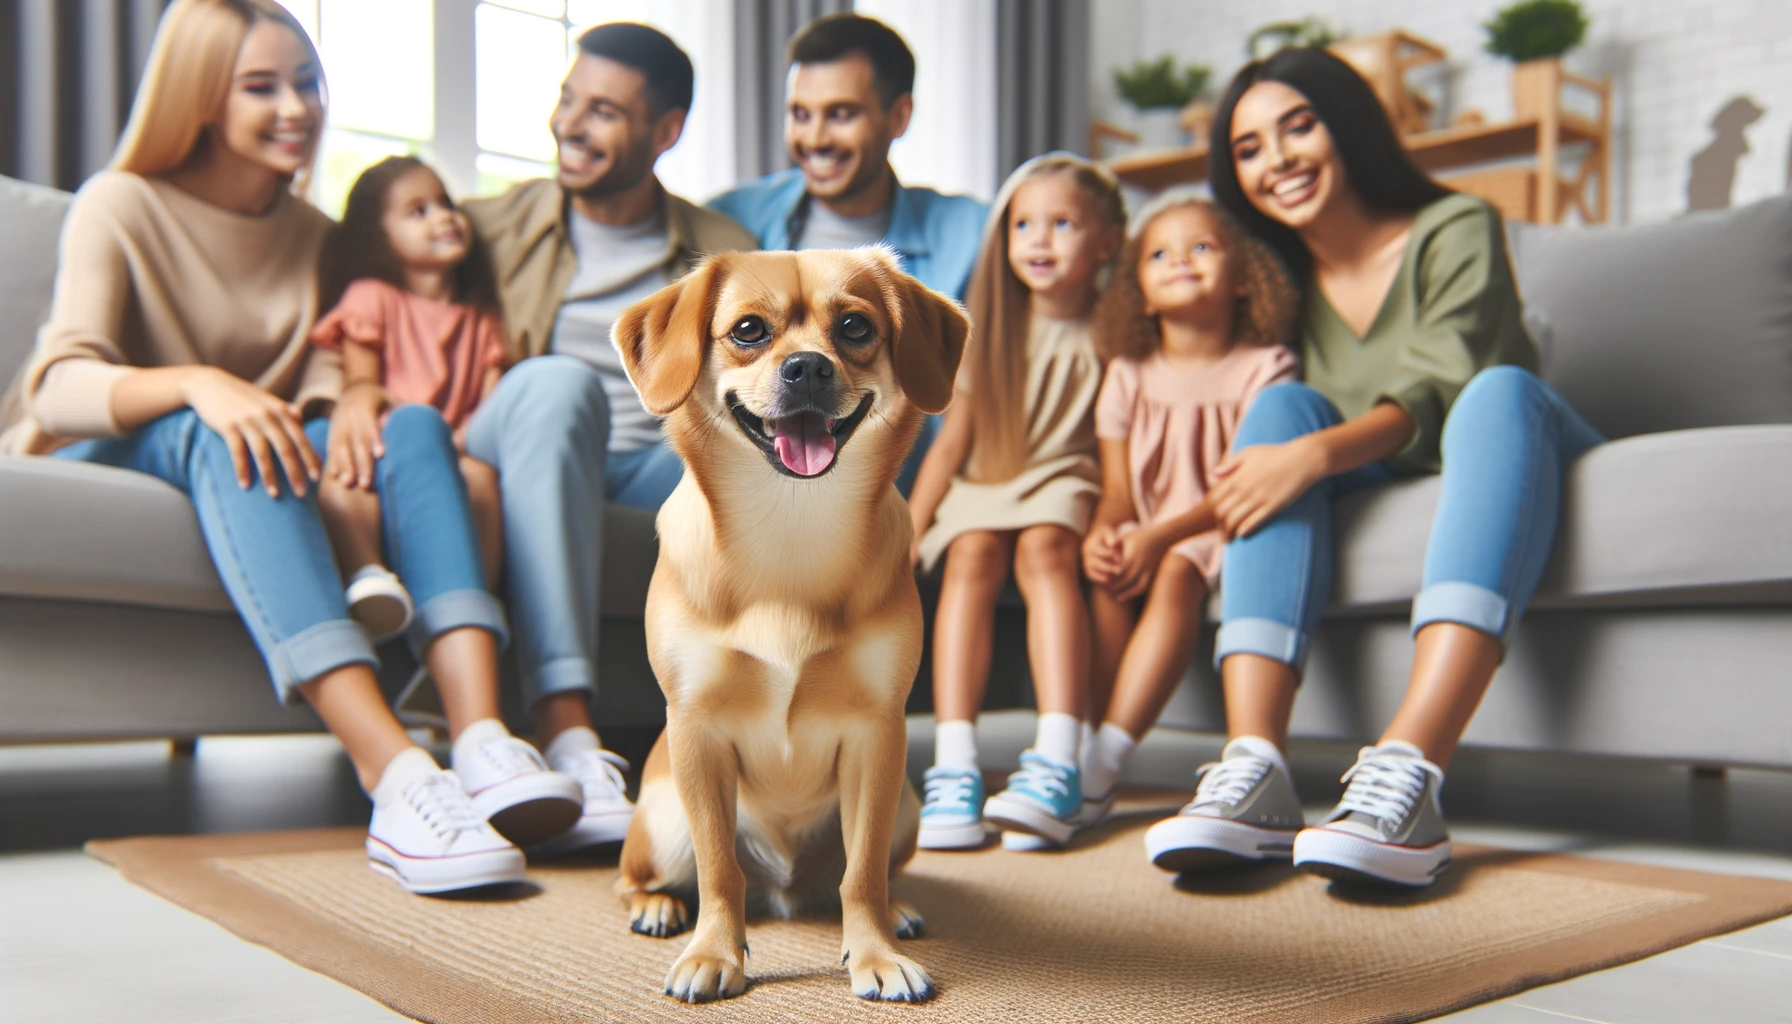 A happy Labrahuahua sitting in the middle of a joyful family, encapsulating the breed's potential role as a fantastic family pet